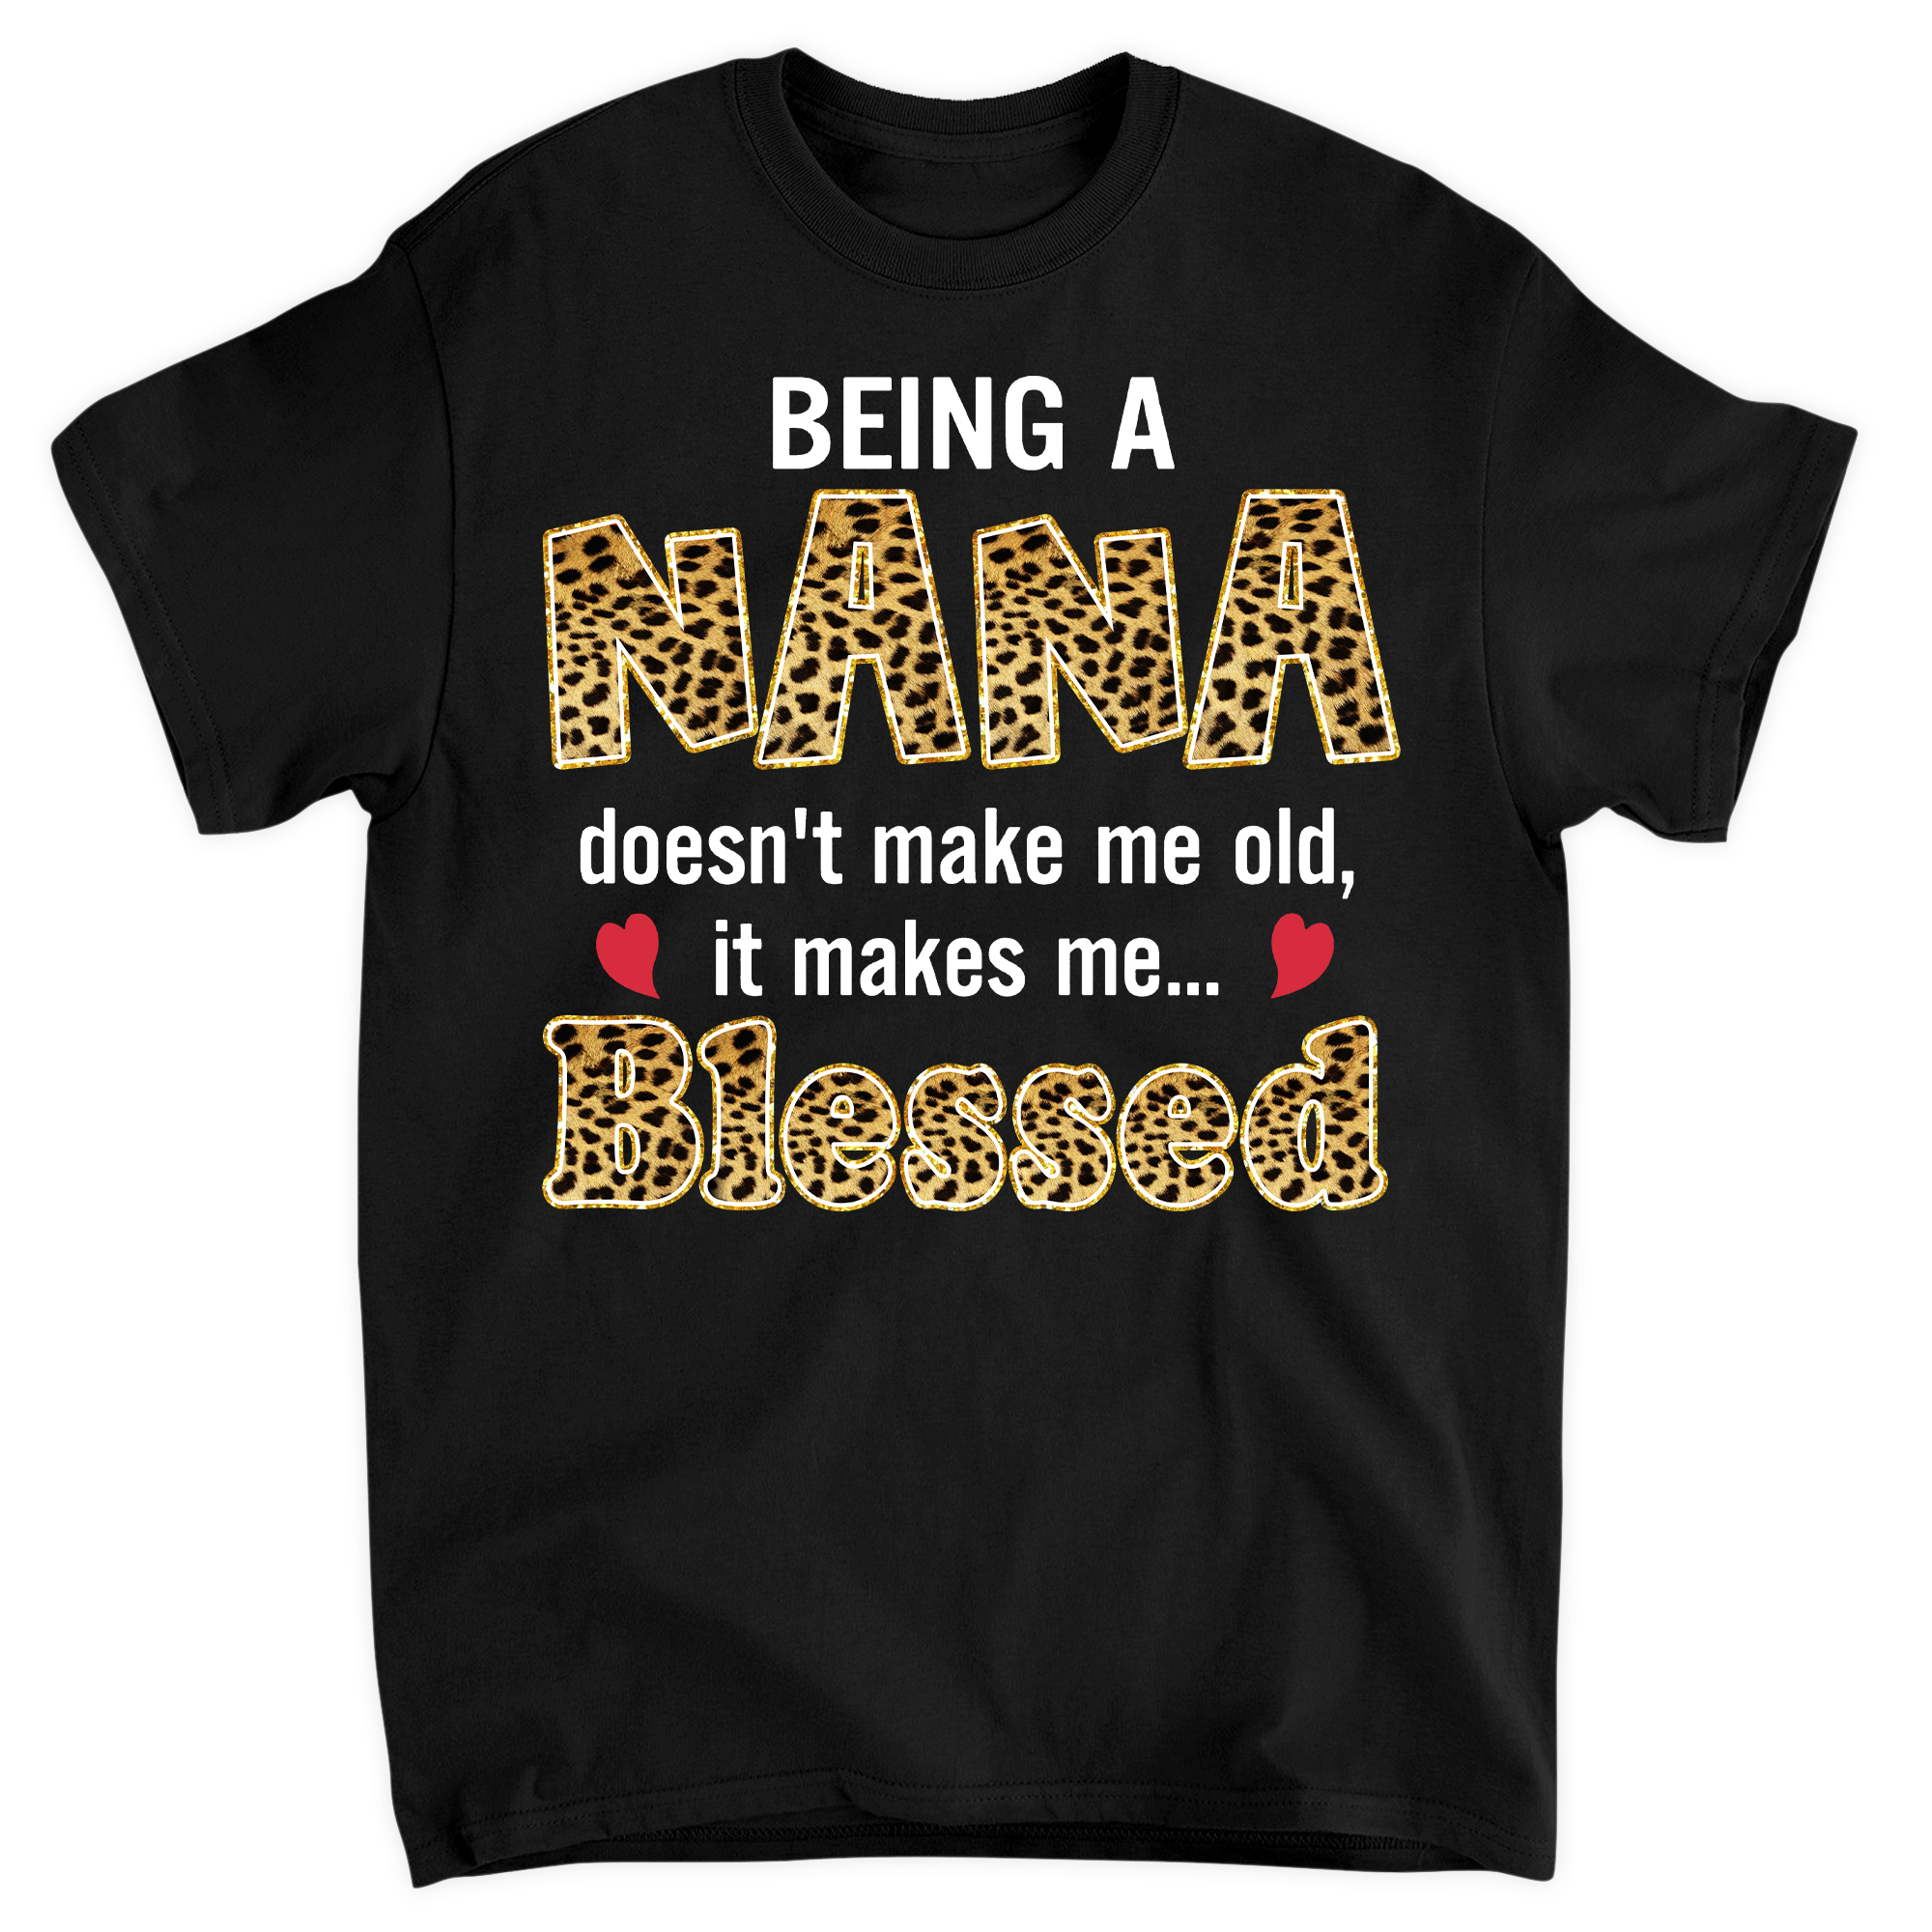 Being Grandma Doesn't Make Me Old, It Makes Me Blessed - T-shirt - Mother's Day Gift For Grandmother, Grandma, ARND037